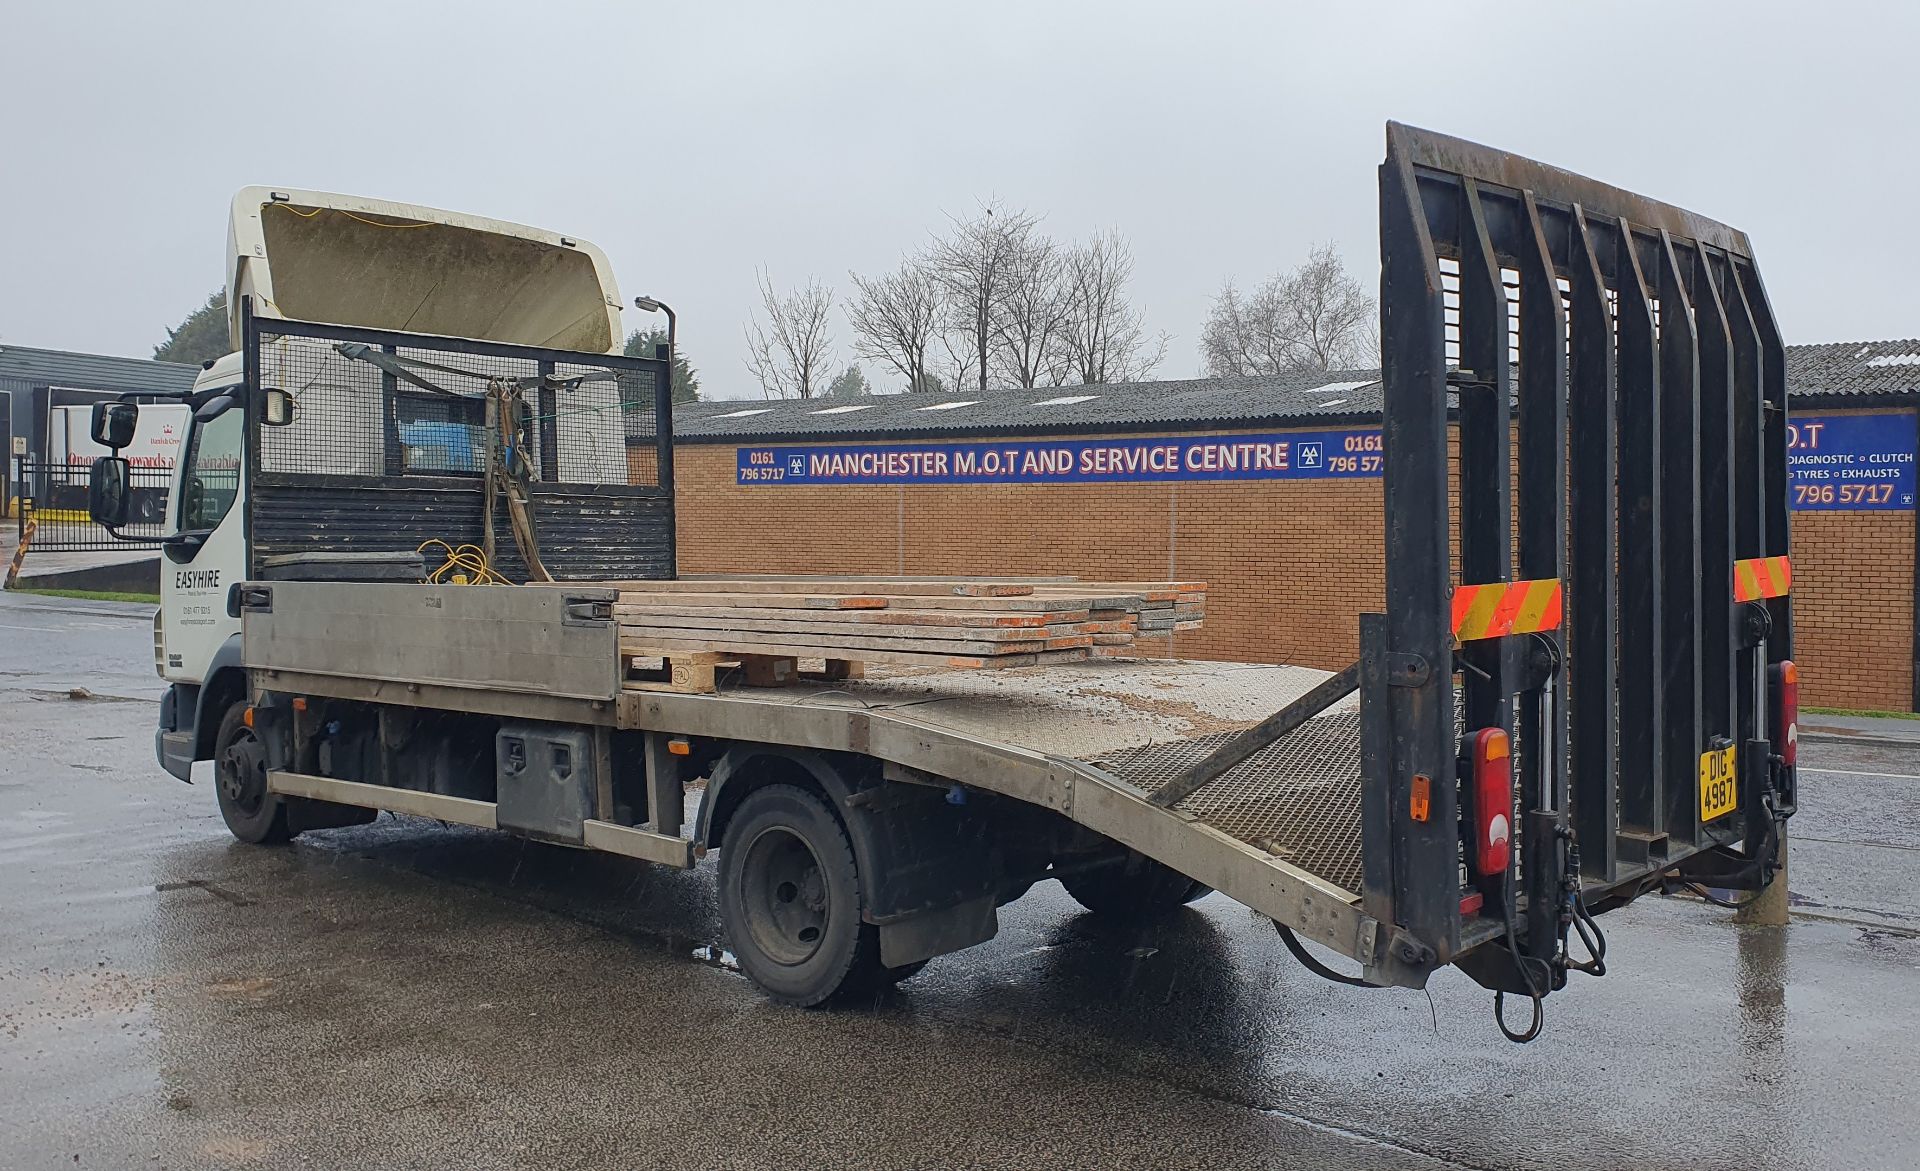 DAF LF 45.160 Flatbed Lorry w/ Loading Ramp & Electric Winch | DIG 4987 | 494,328km - Image 7 of 22